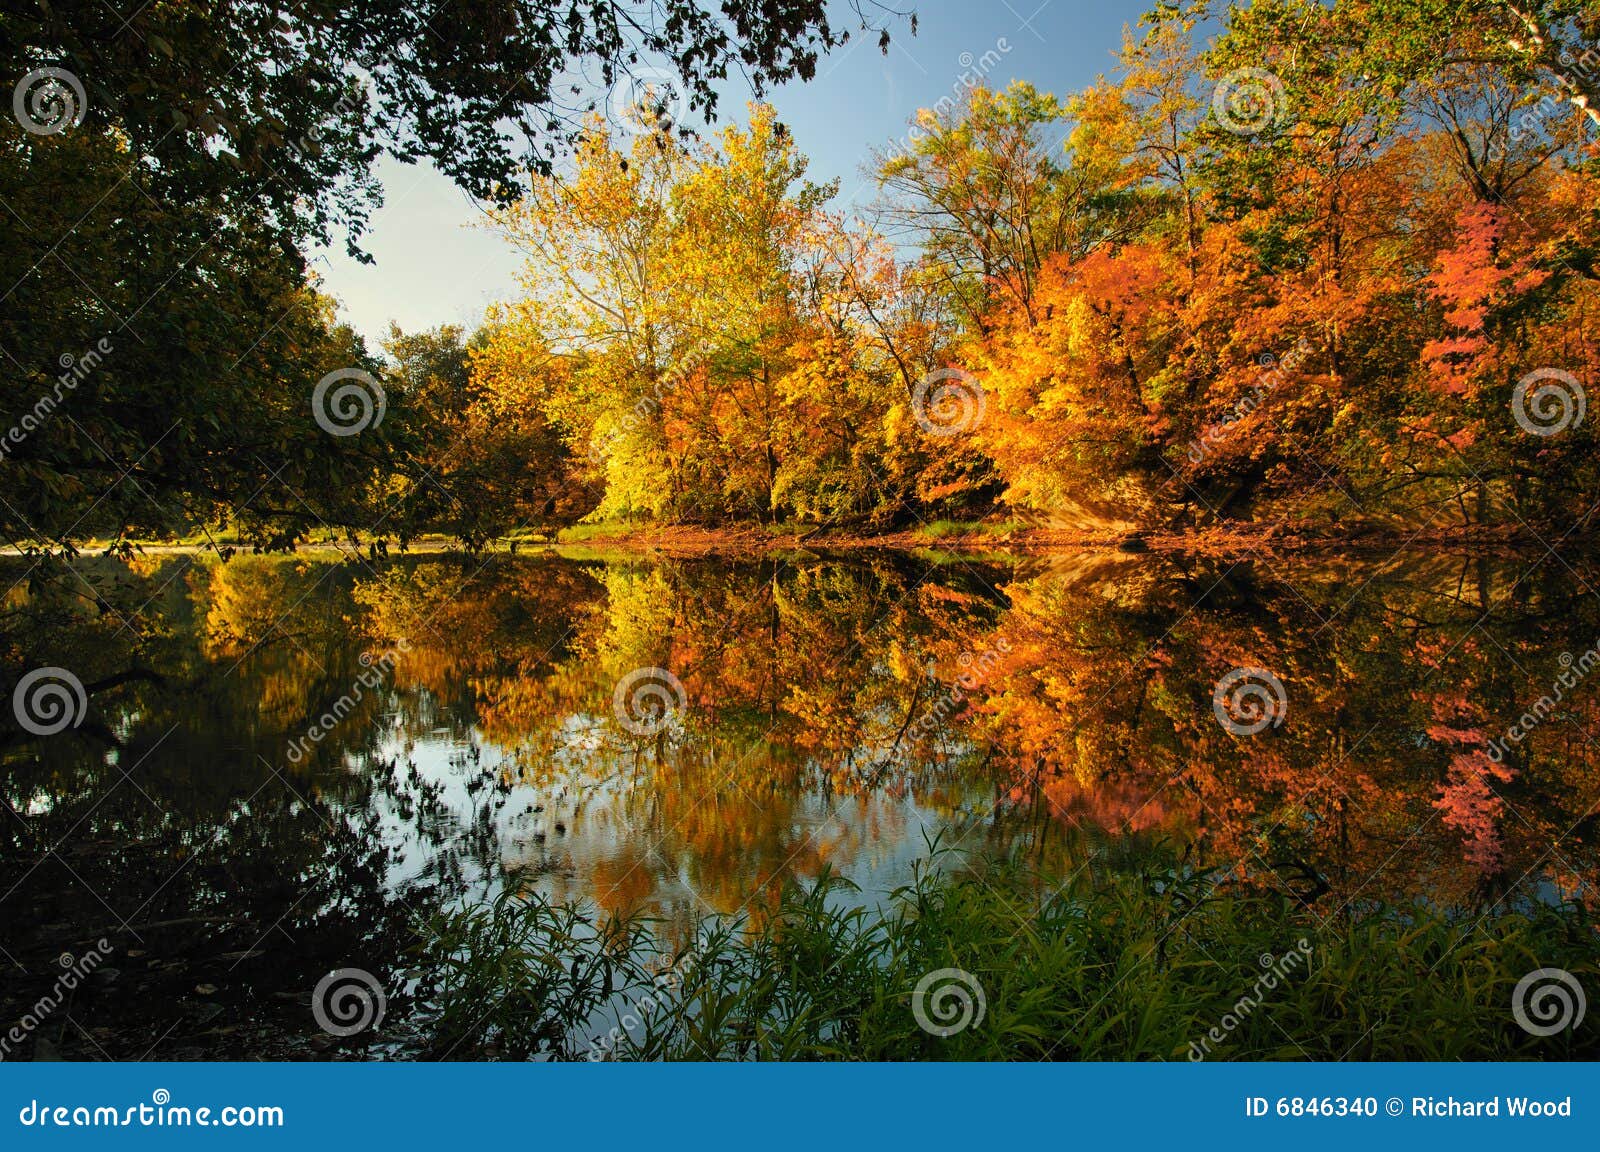 fall reflections on a river